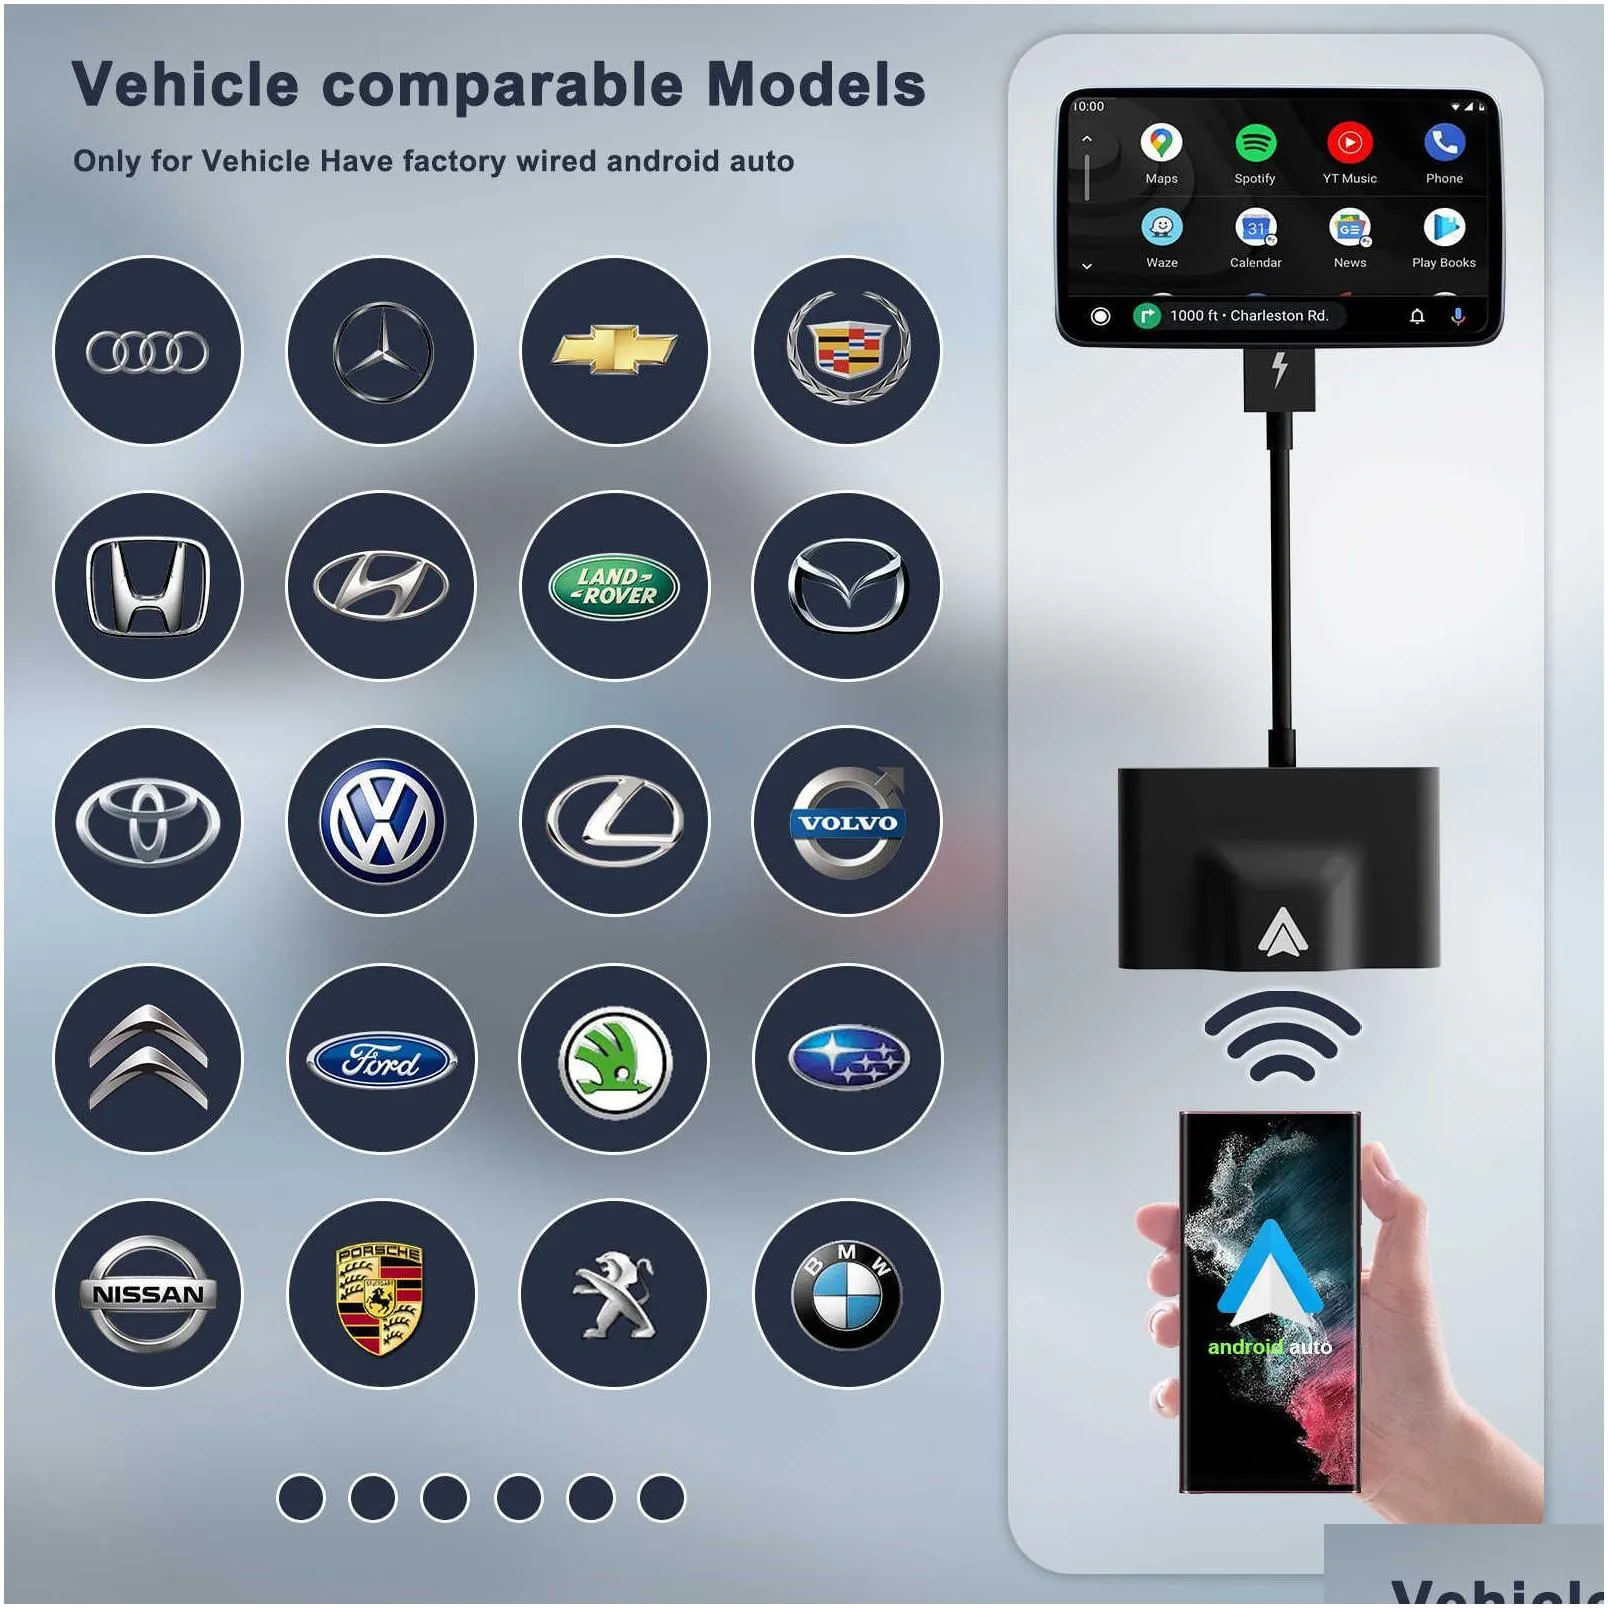 New Wireless CarPlay Adapter For iPhone Android 5GHz WiFi Wireless Auto Car Adapter Wireless Carplay Dongle Plug Play Online Update